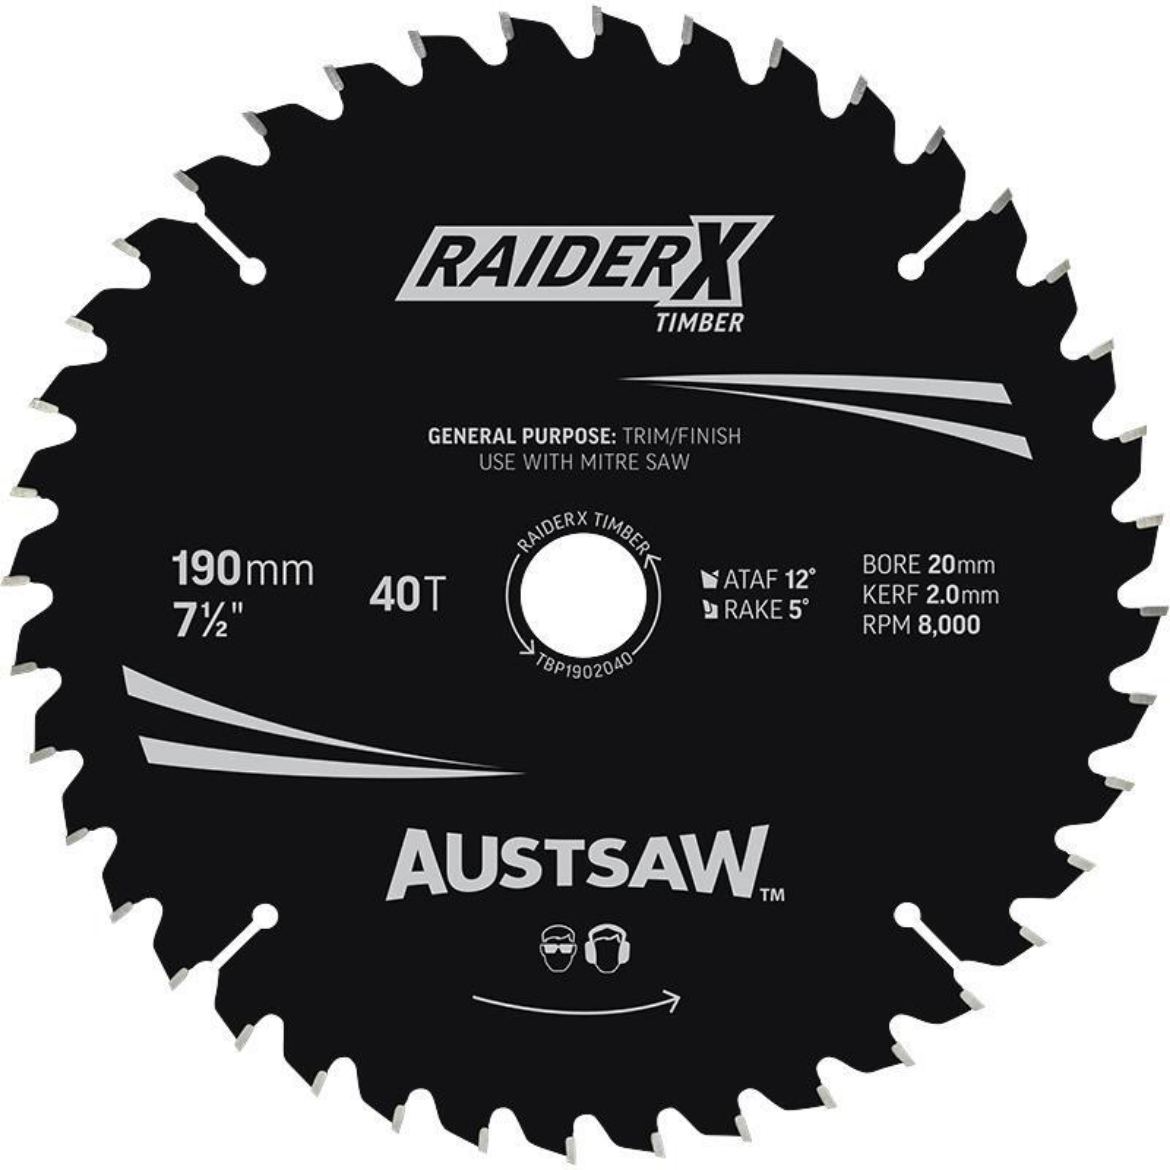 Picture of Austsaw RaiderX Timber Blade 190mm x 20 Bore x 40 T